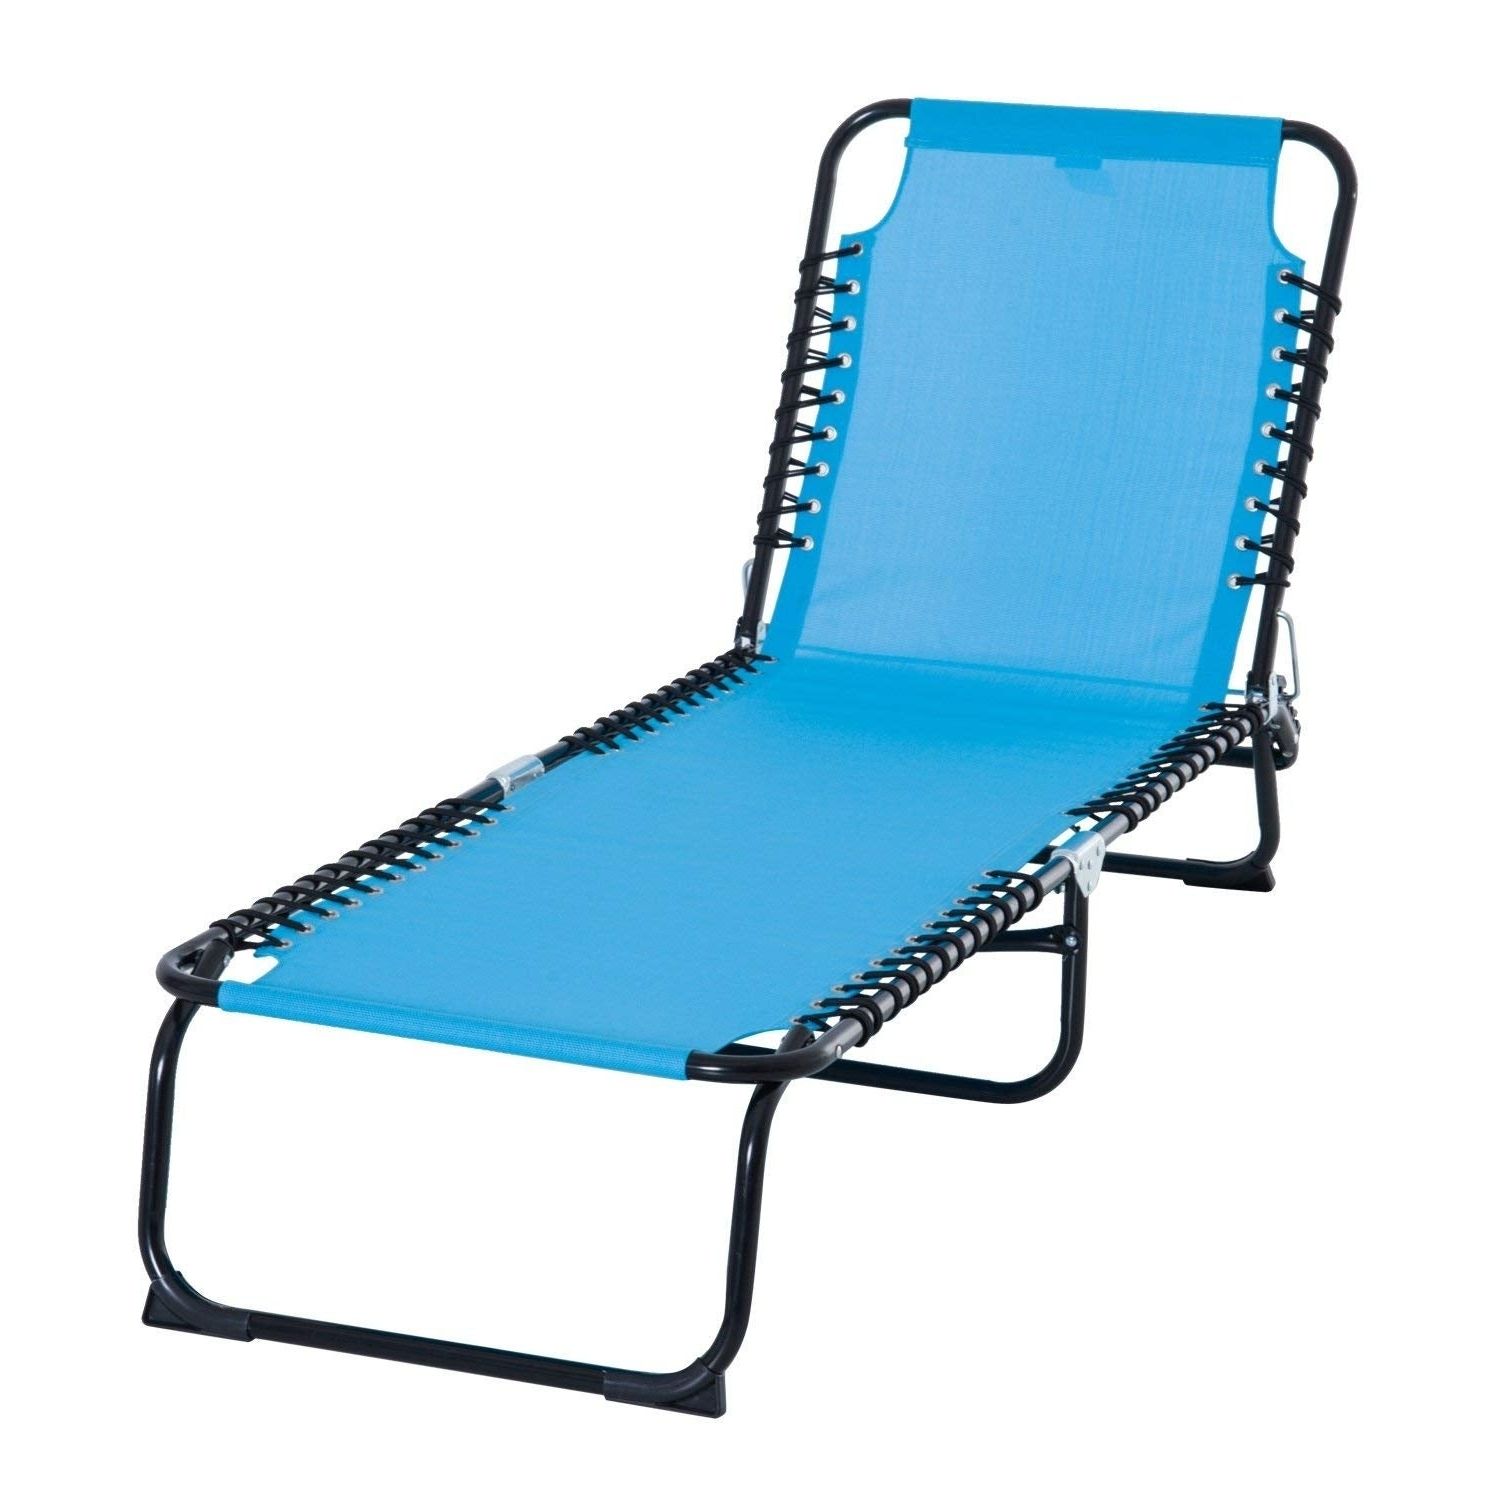 Preferred Portable Extendable Folding Reclining Chairs Inside Outsunny 3 Position Portable Reclining Beach Chaise Lounge Folding Chair  Outdoor Patio – Dark Blue (View 6 of 25)